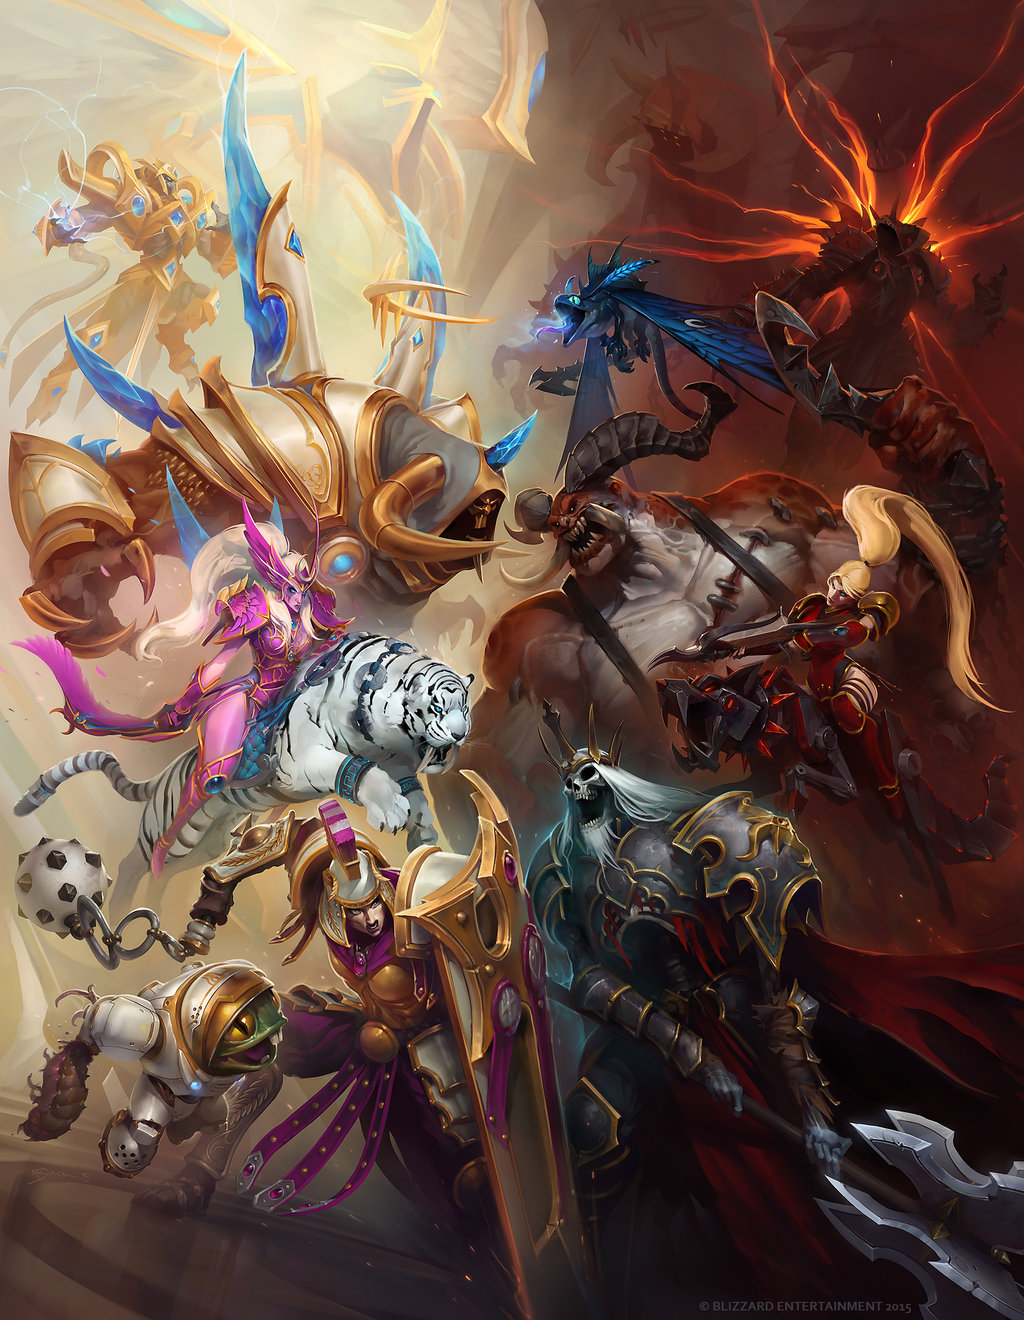 Fine Art: The Heroes Of The Storm